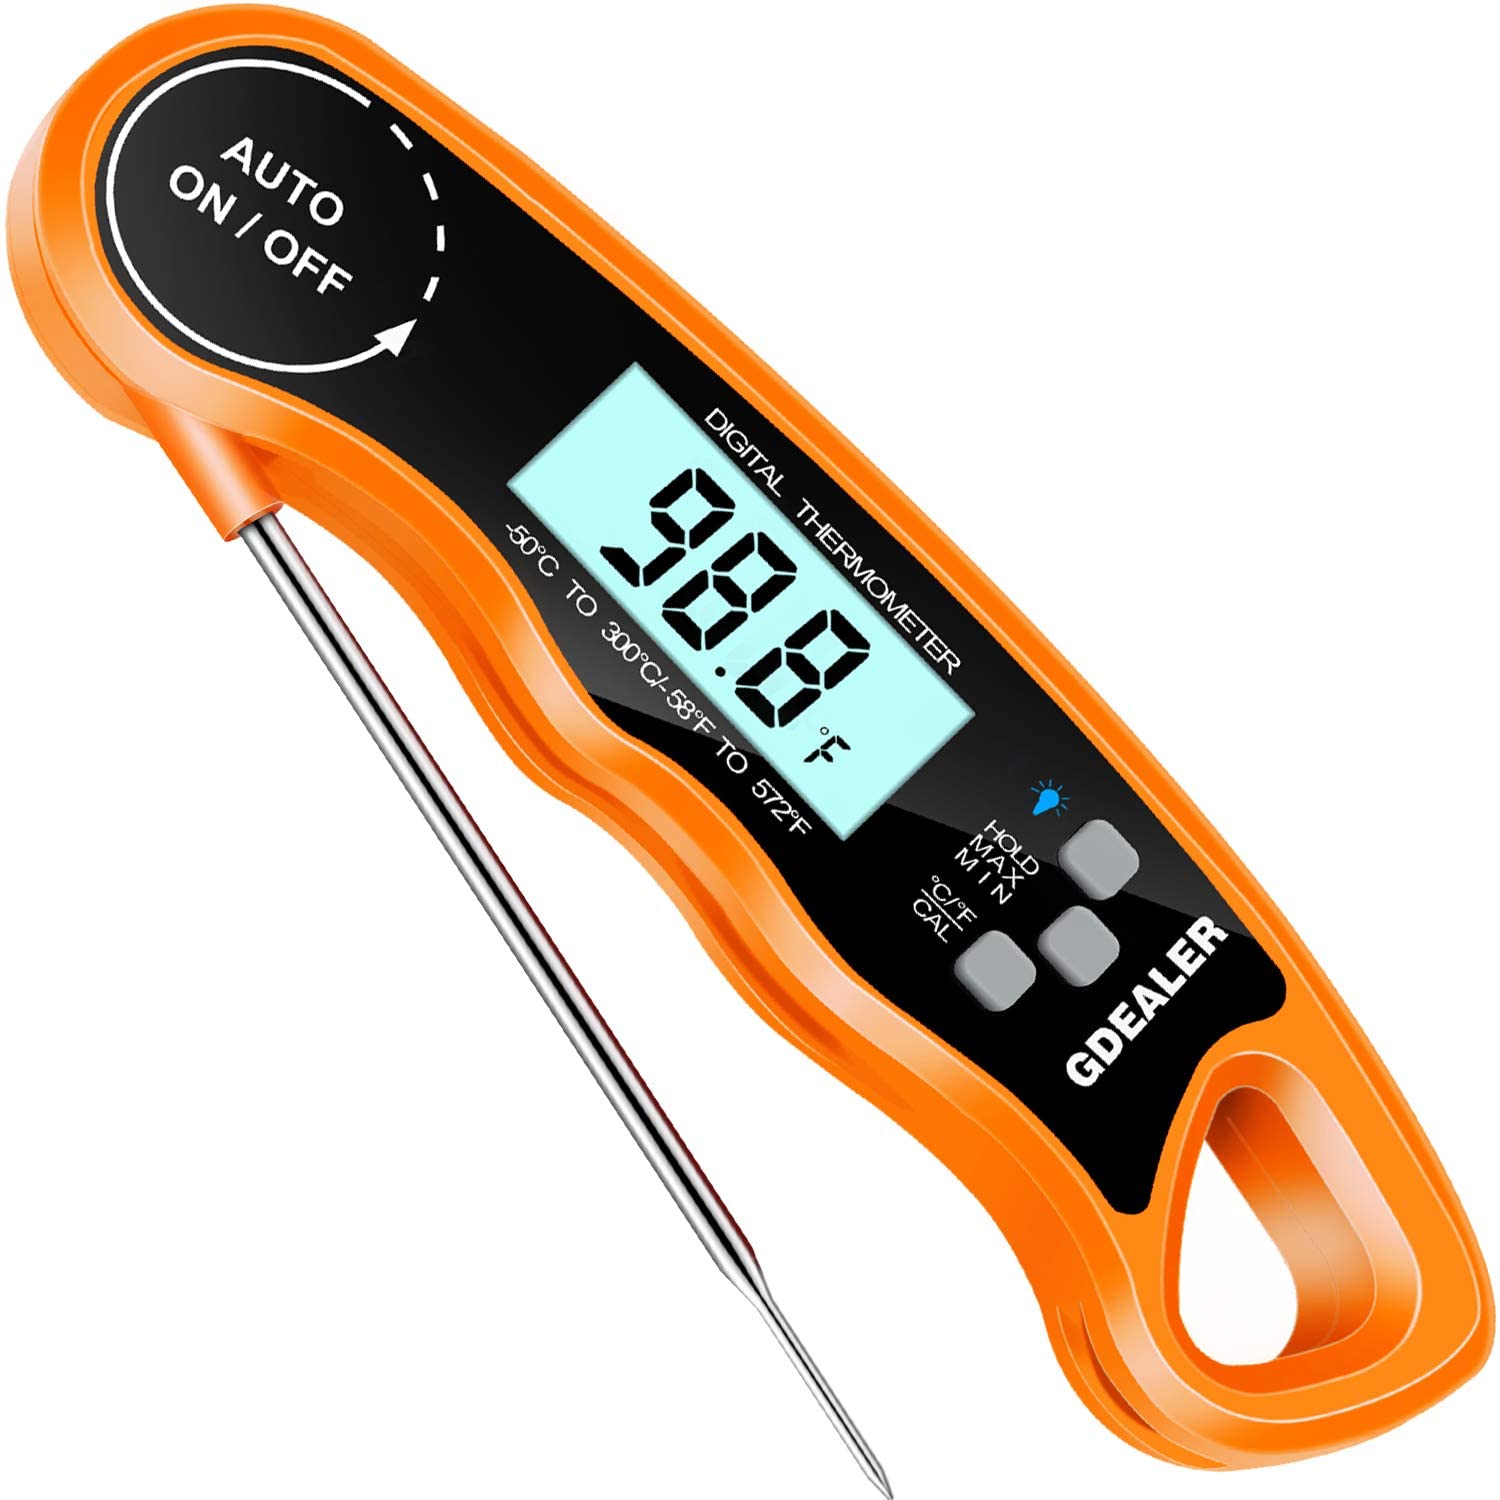 GDEALER Meat Thermometer Digital Instant Read Thermometer Ultra-Fast Cooking Food Thermometer with 4.6” Folding Probe Calibration Function for Kitchen Milk Candy, BBQ Grill, Smokers Orange